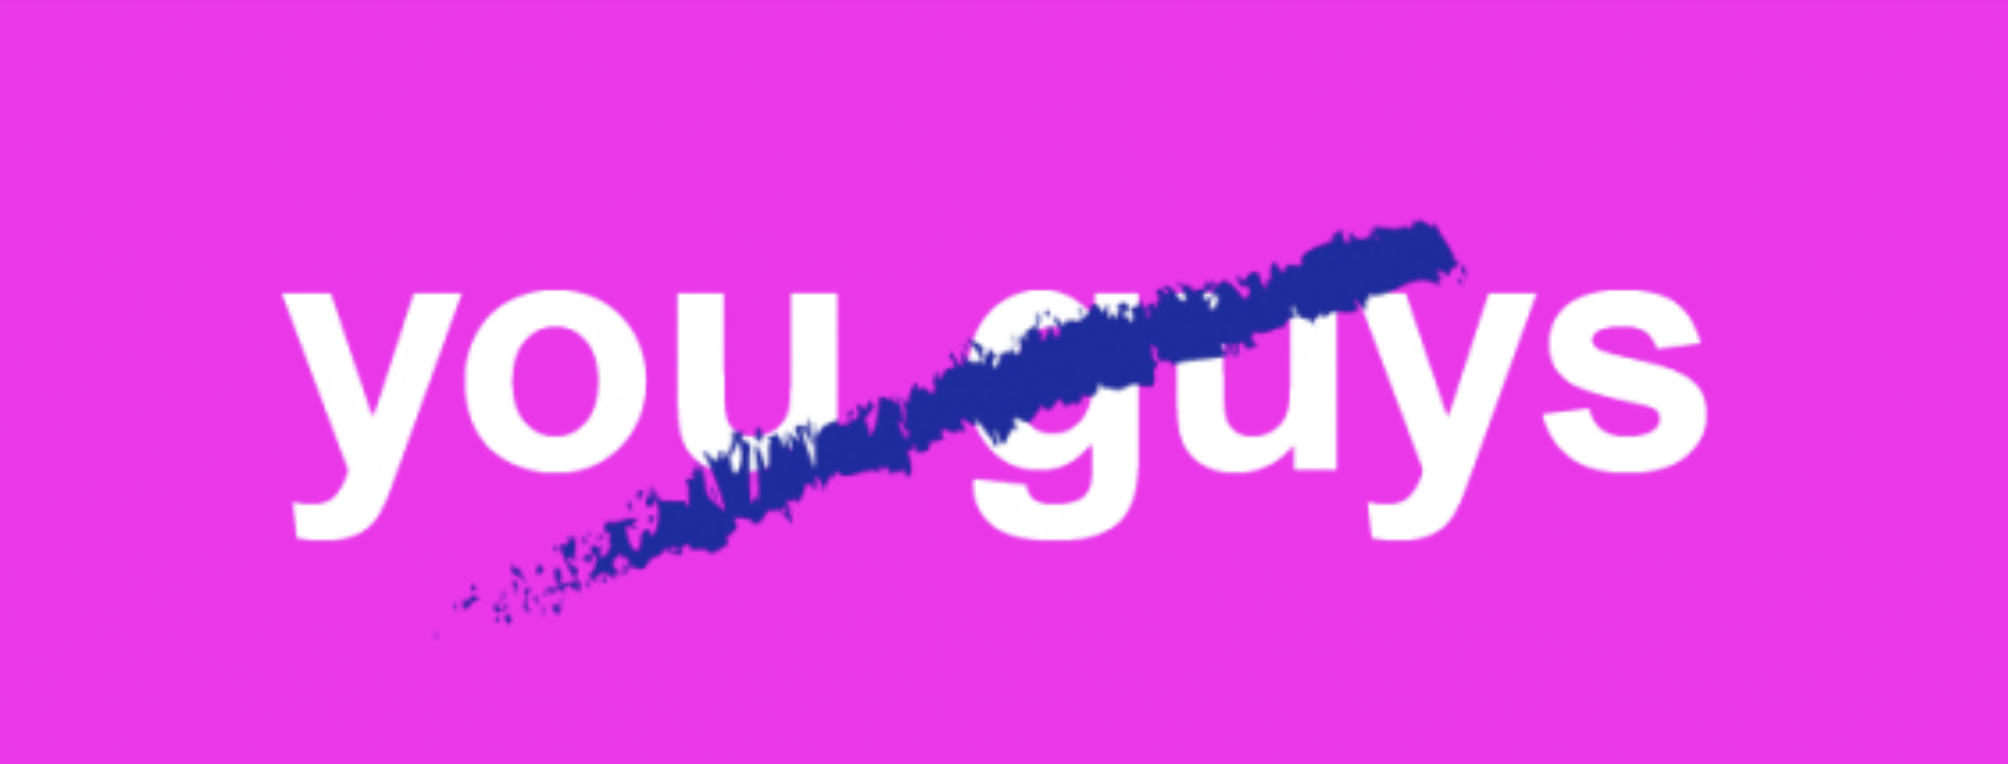 TOTD: The Problem With Phrases Like “You Guys"